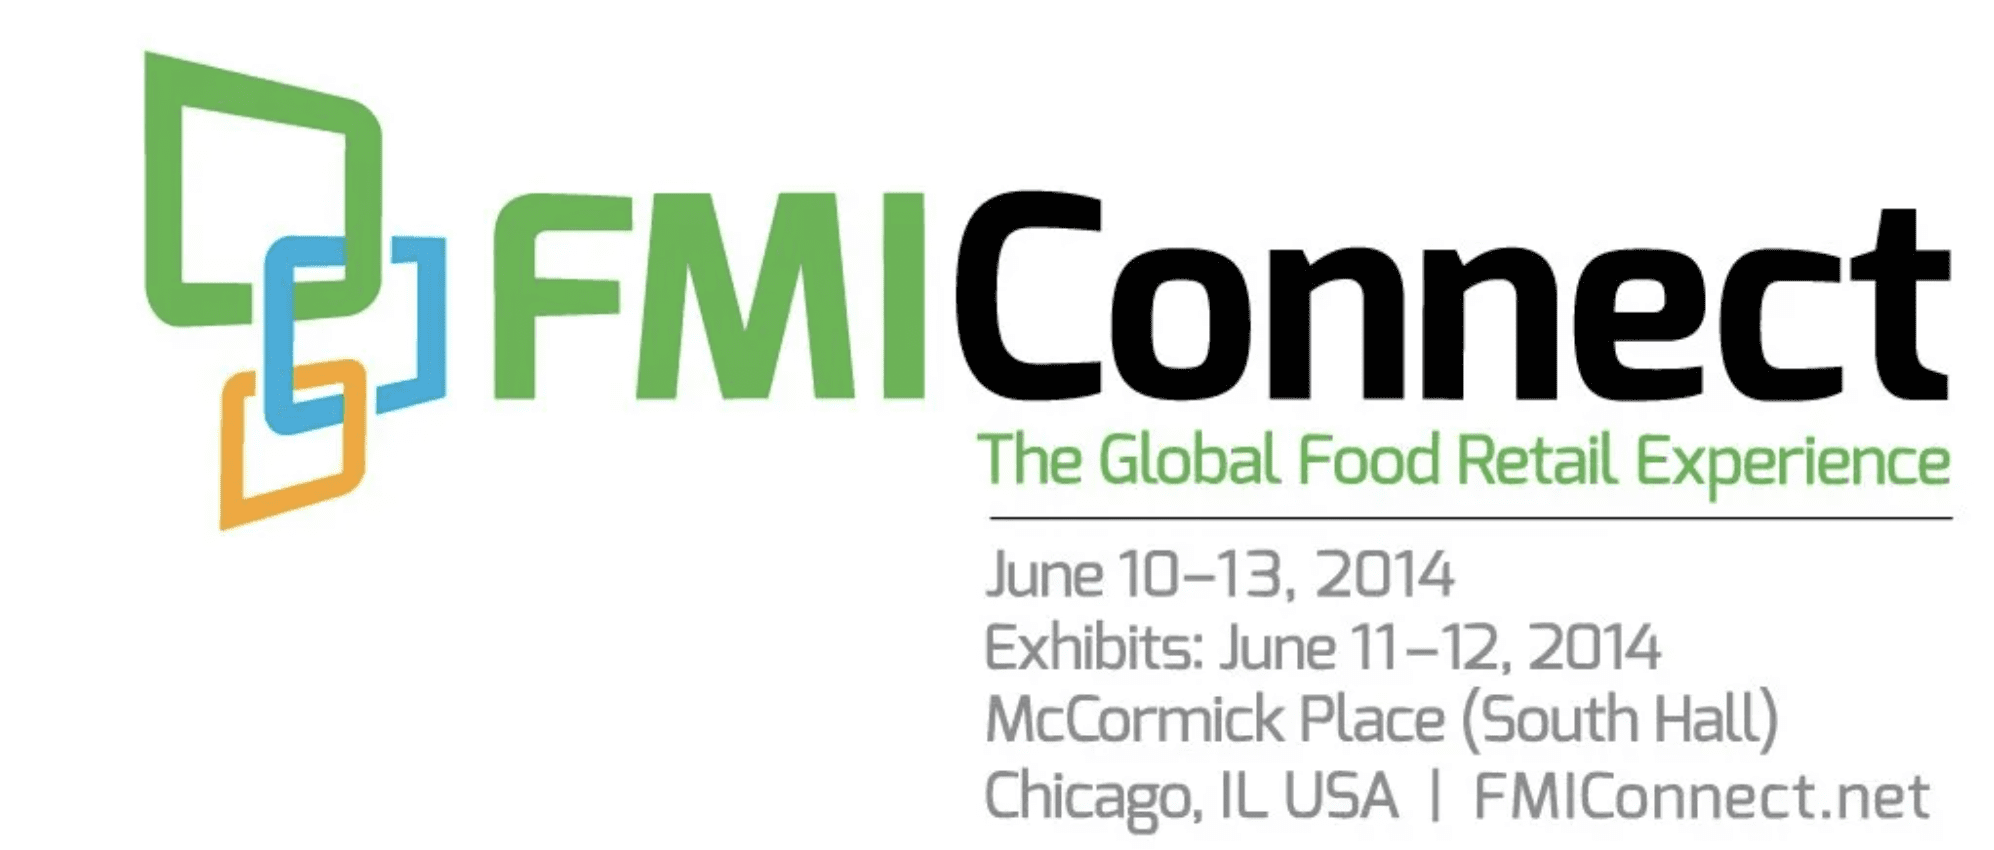 Meet us at the FMI Connect in Chicago